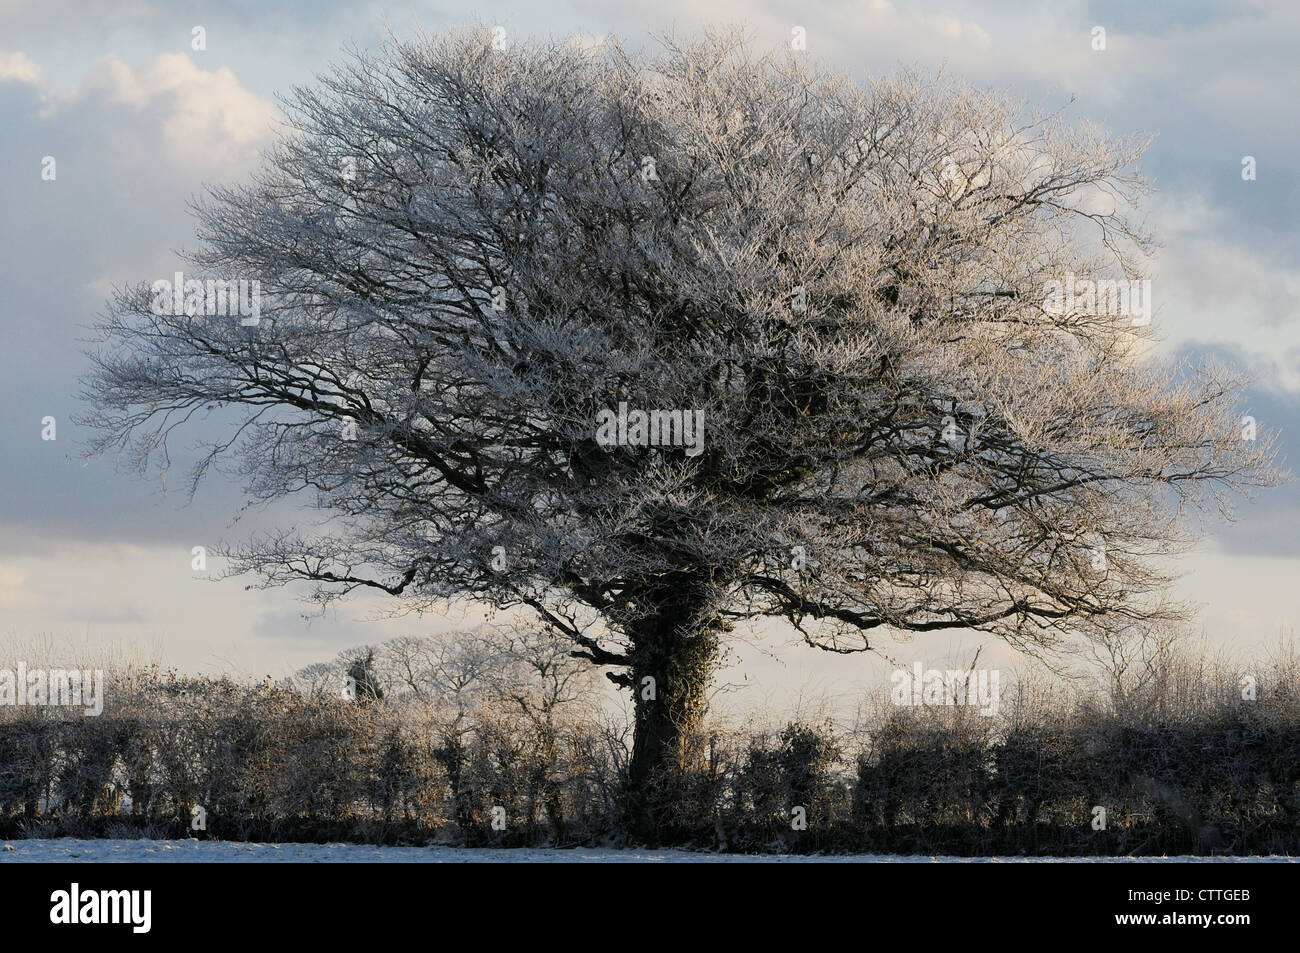 Beech tree and hedgerow covered in snow, Slane, County Meath, Ireland Stock Photo